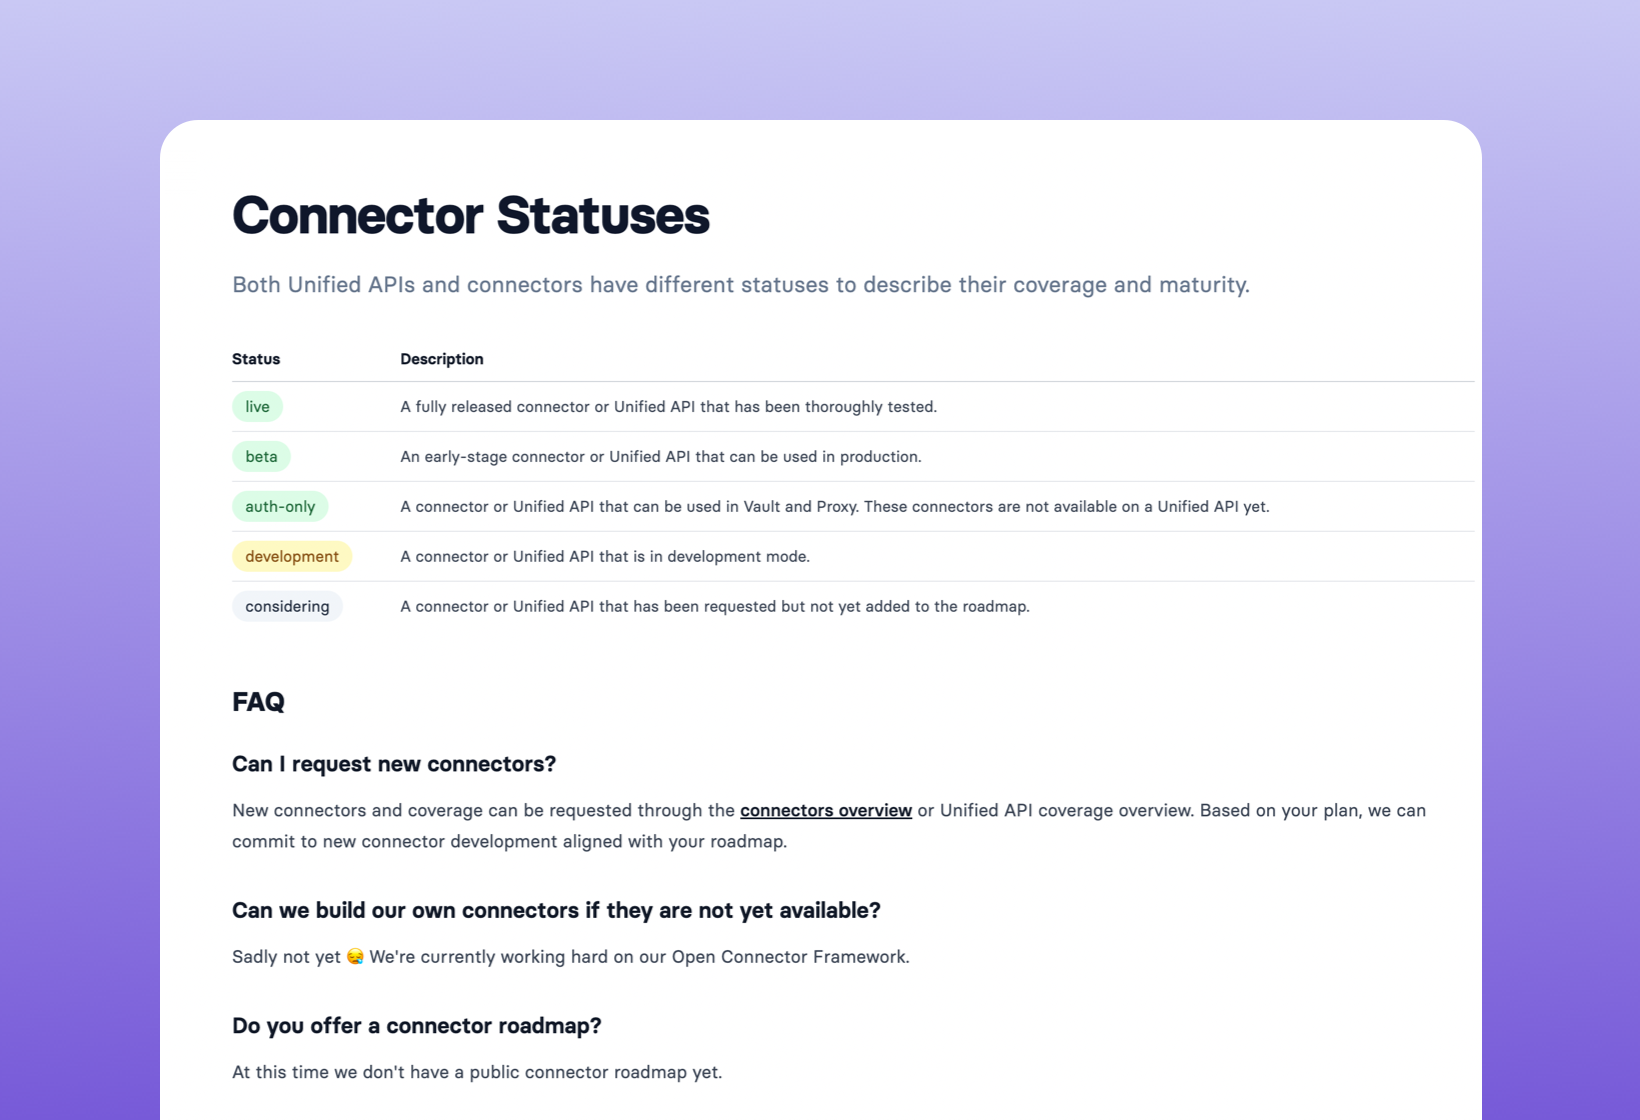 Connector statuses